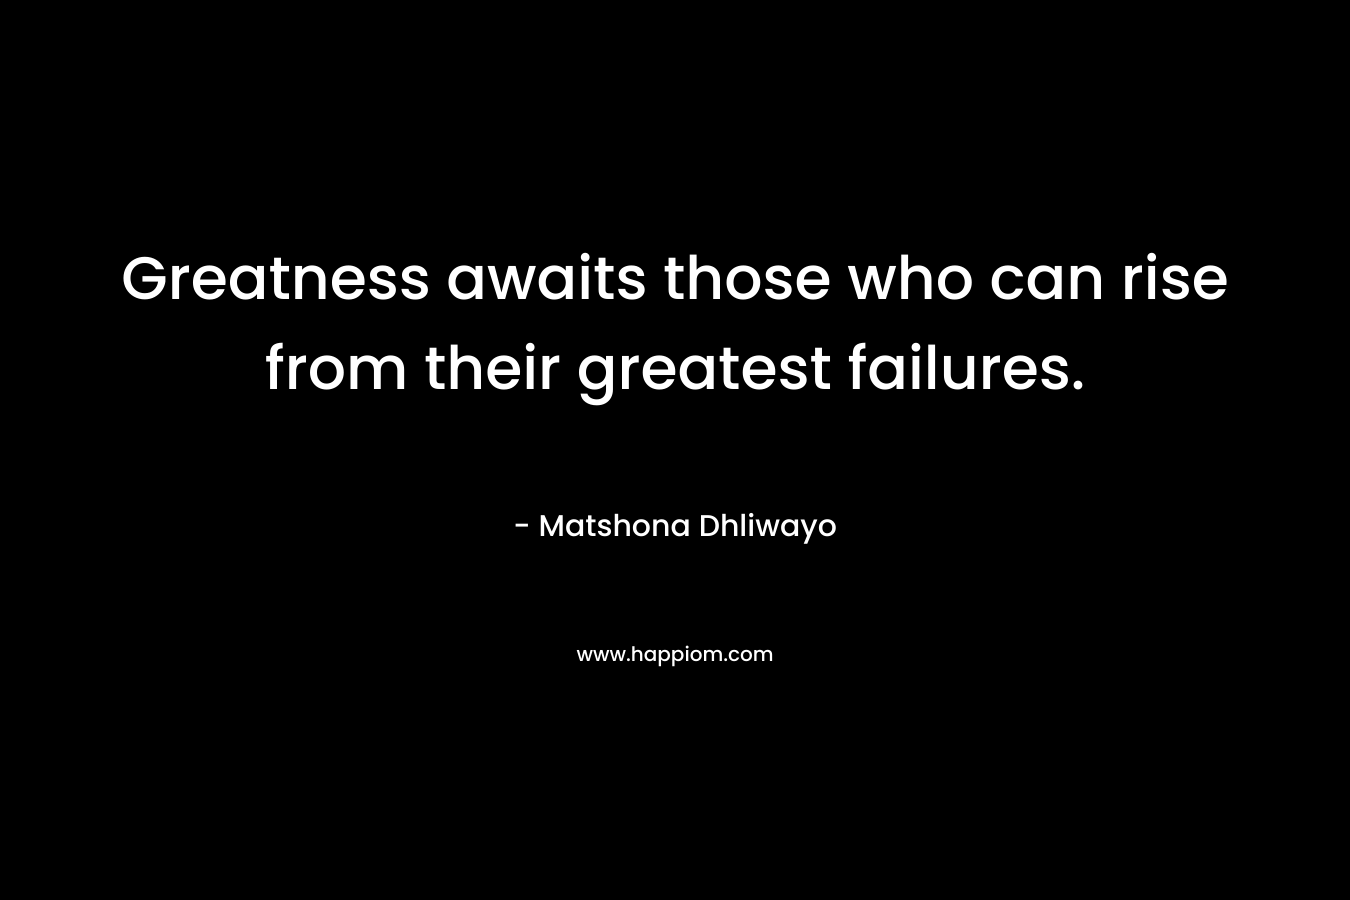 Greatness awaits those who can rise from their greatest failures. – Matshona Dhliwayo